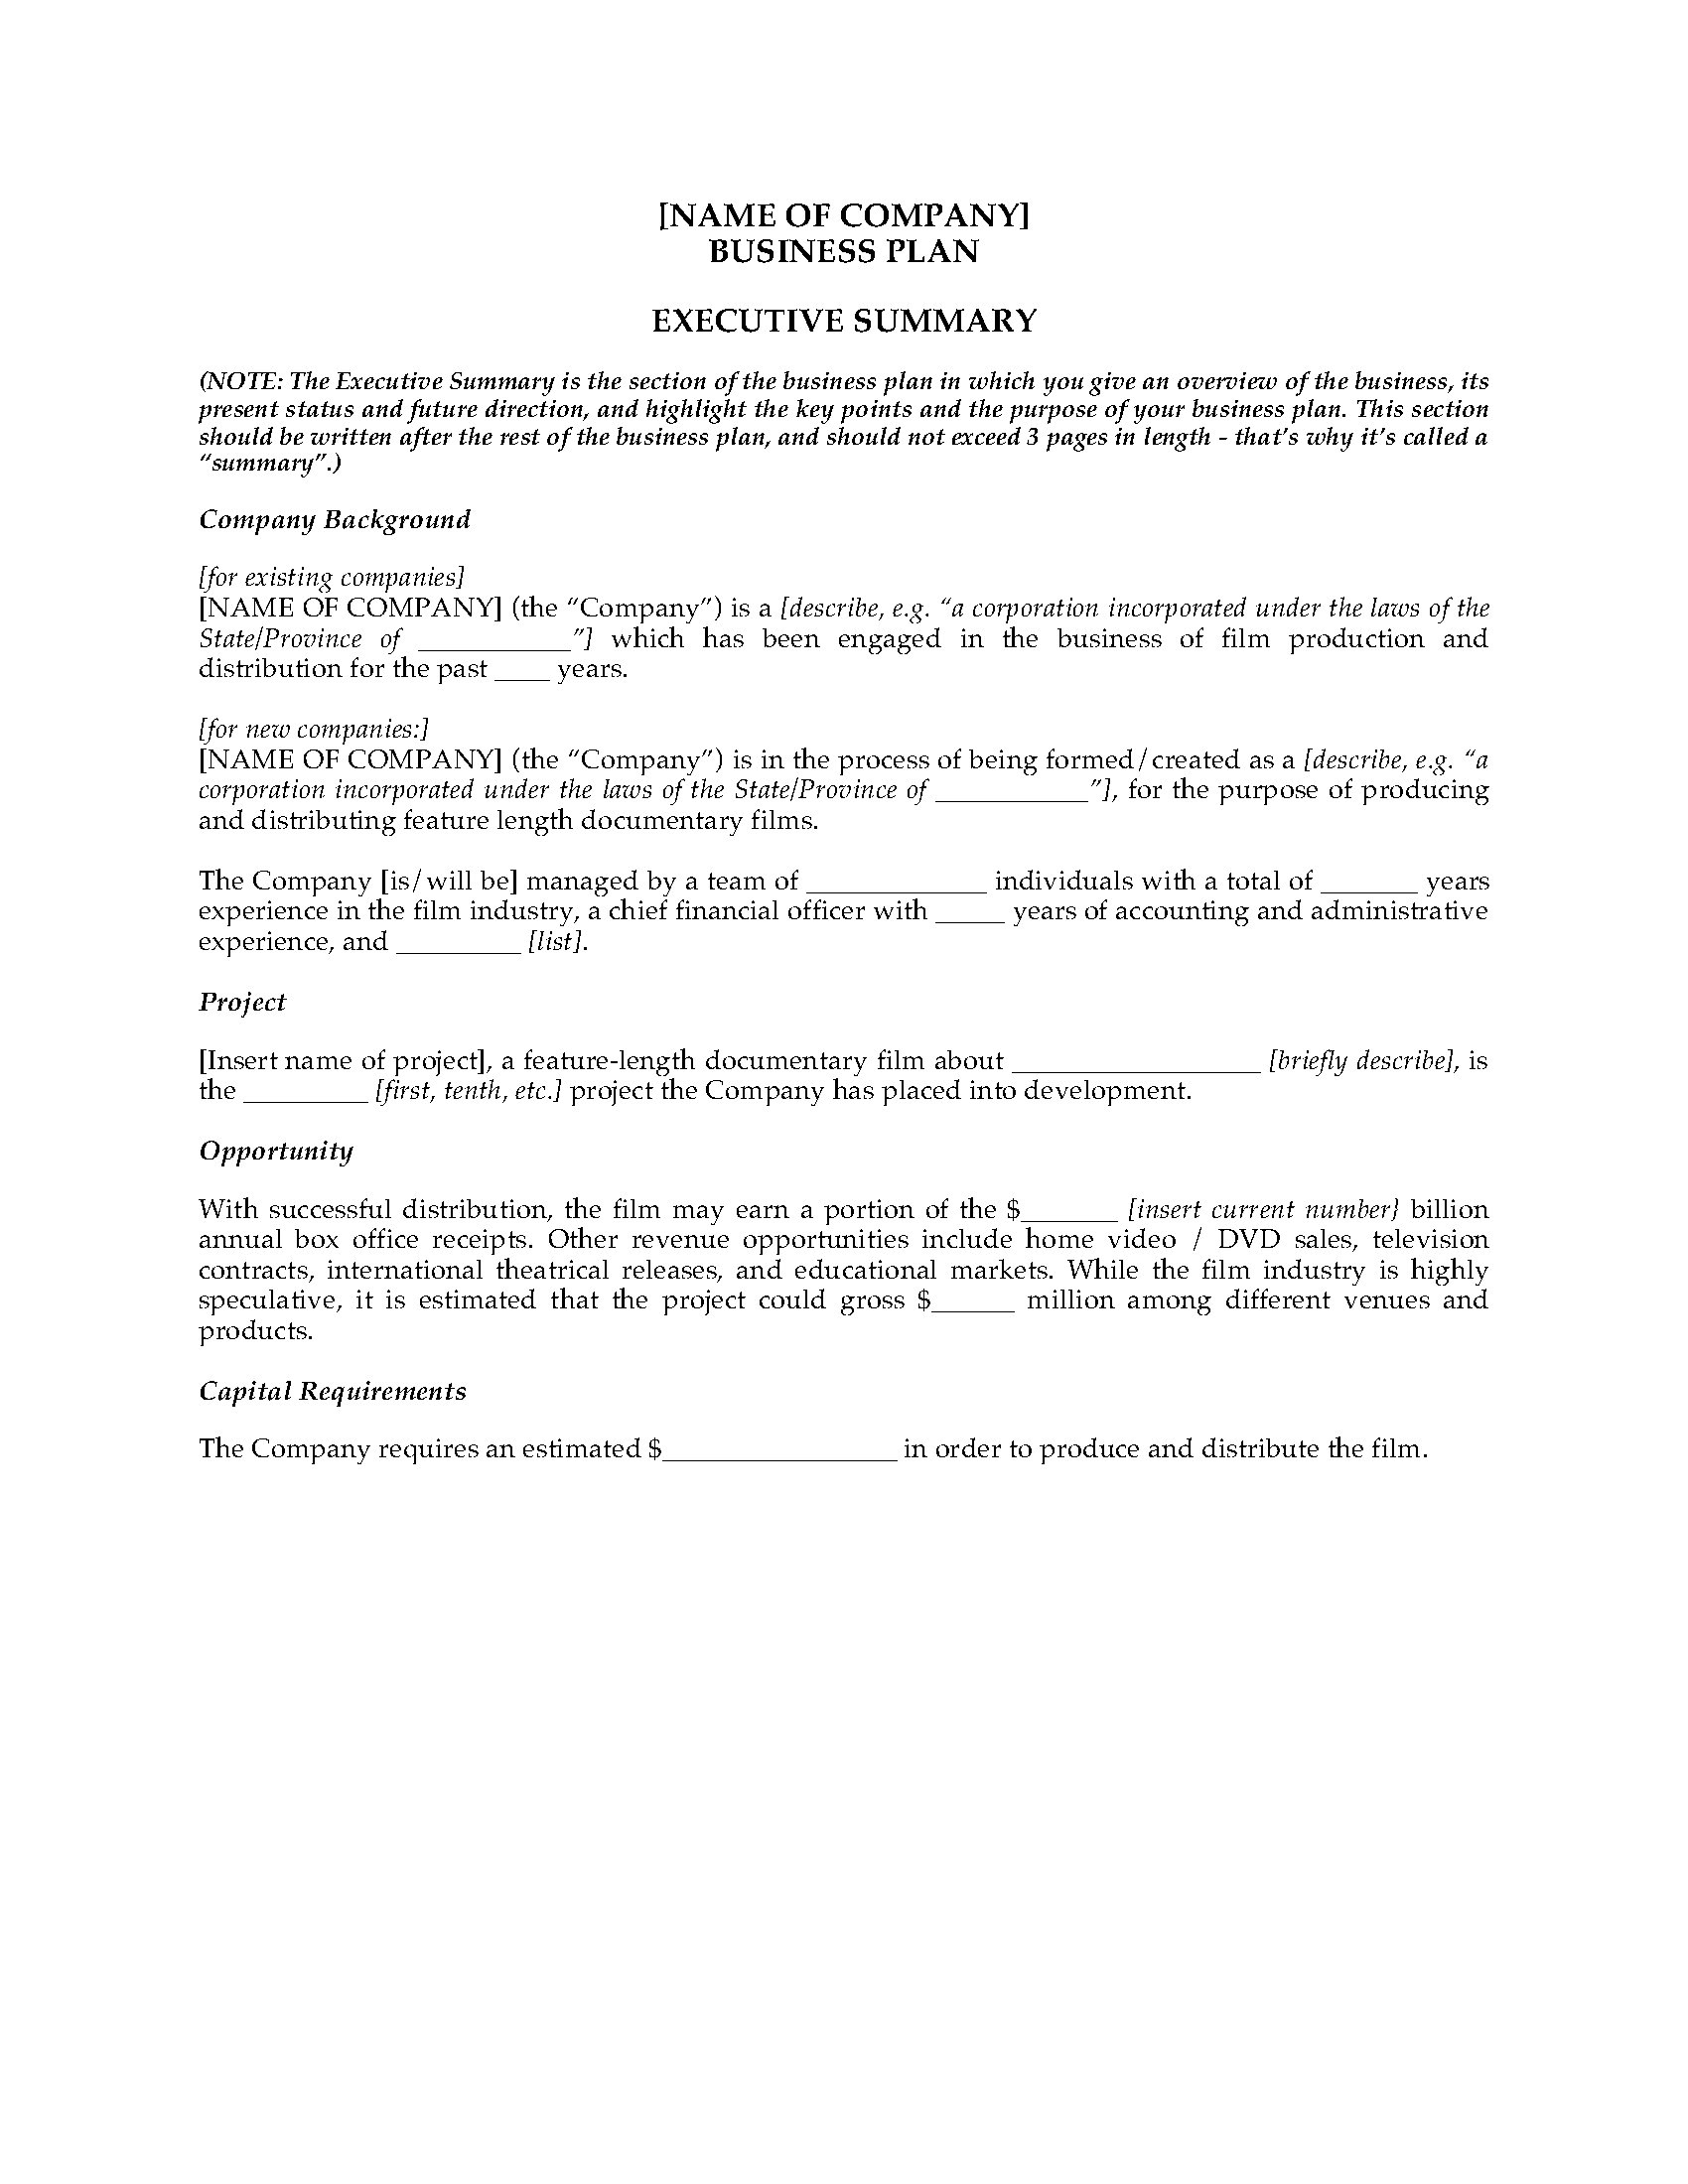 Documentary Film Business Plan | Legal Forms And Business Templates with regard to Documentary Film Contract Template